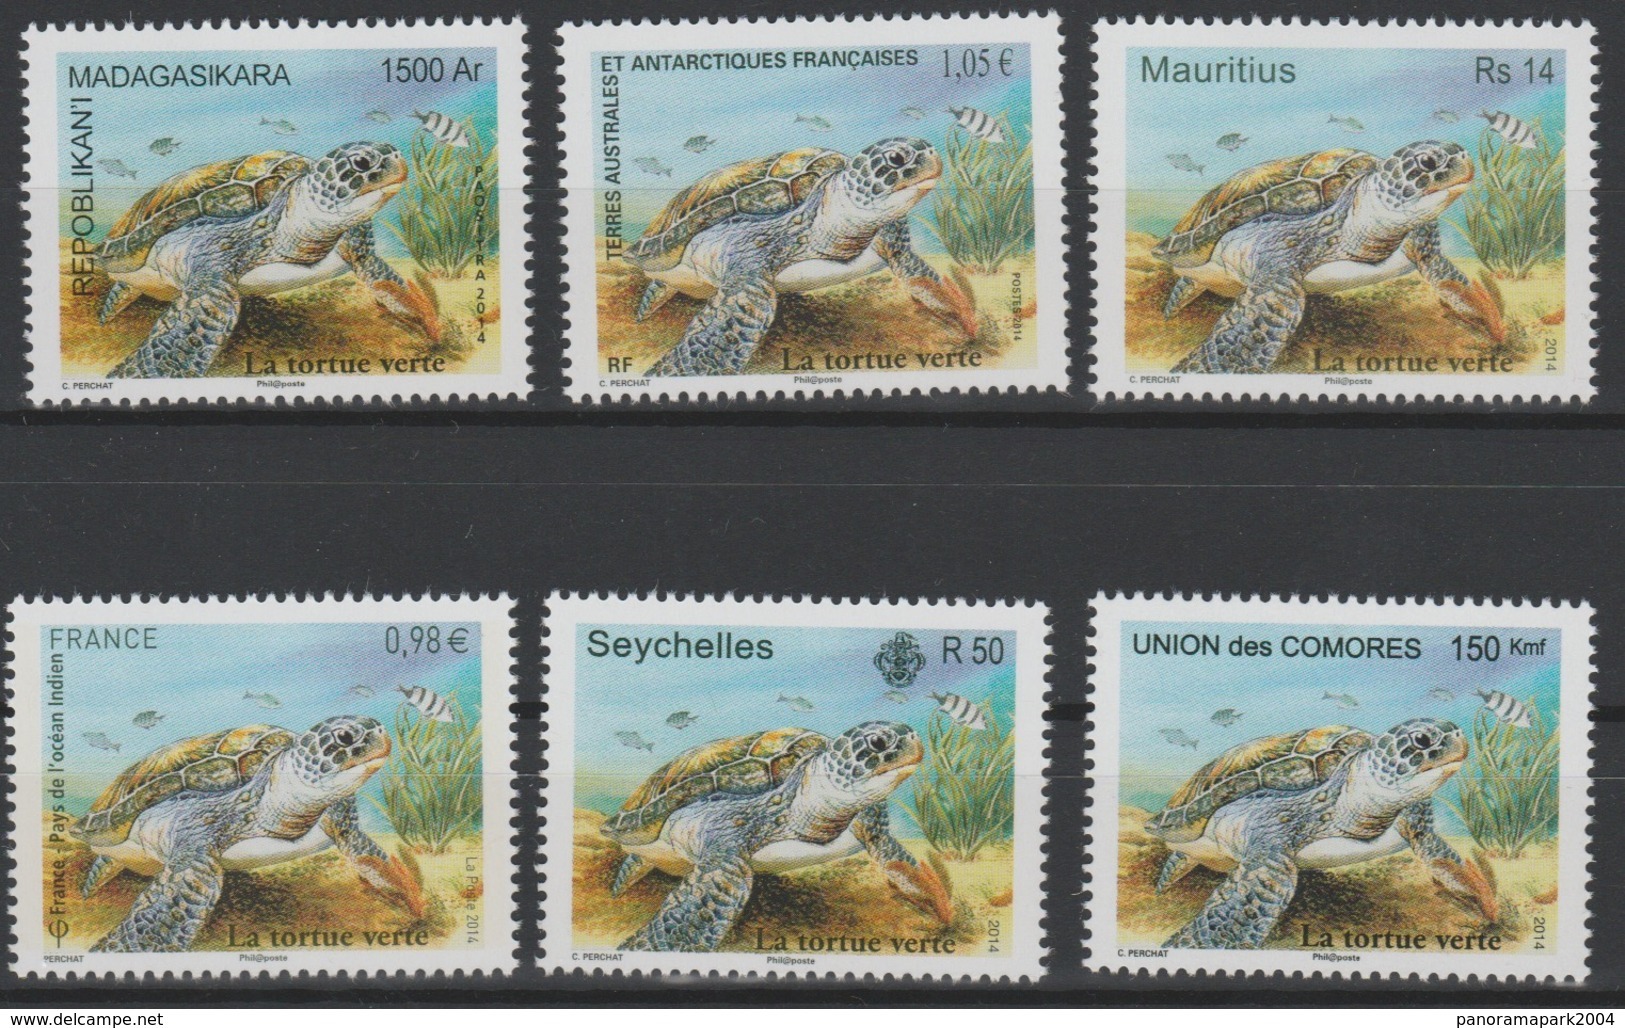 La Tortue Verte Green Turtle Schildkröte 2014 Joint Issue Faune Fauna Madagascar Seychelles France Comores MNH 6 Val. ** - Joint Issues